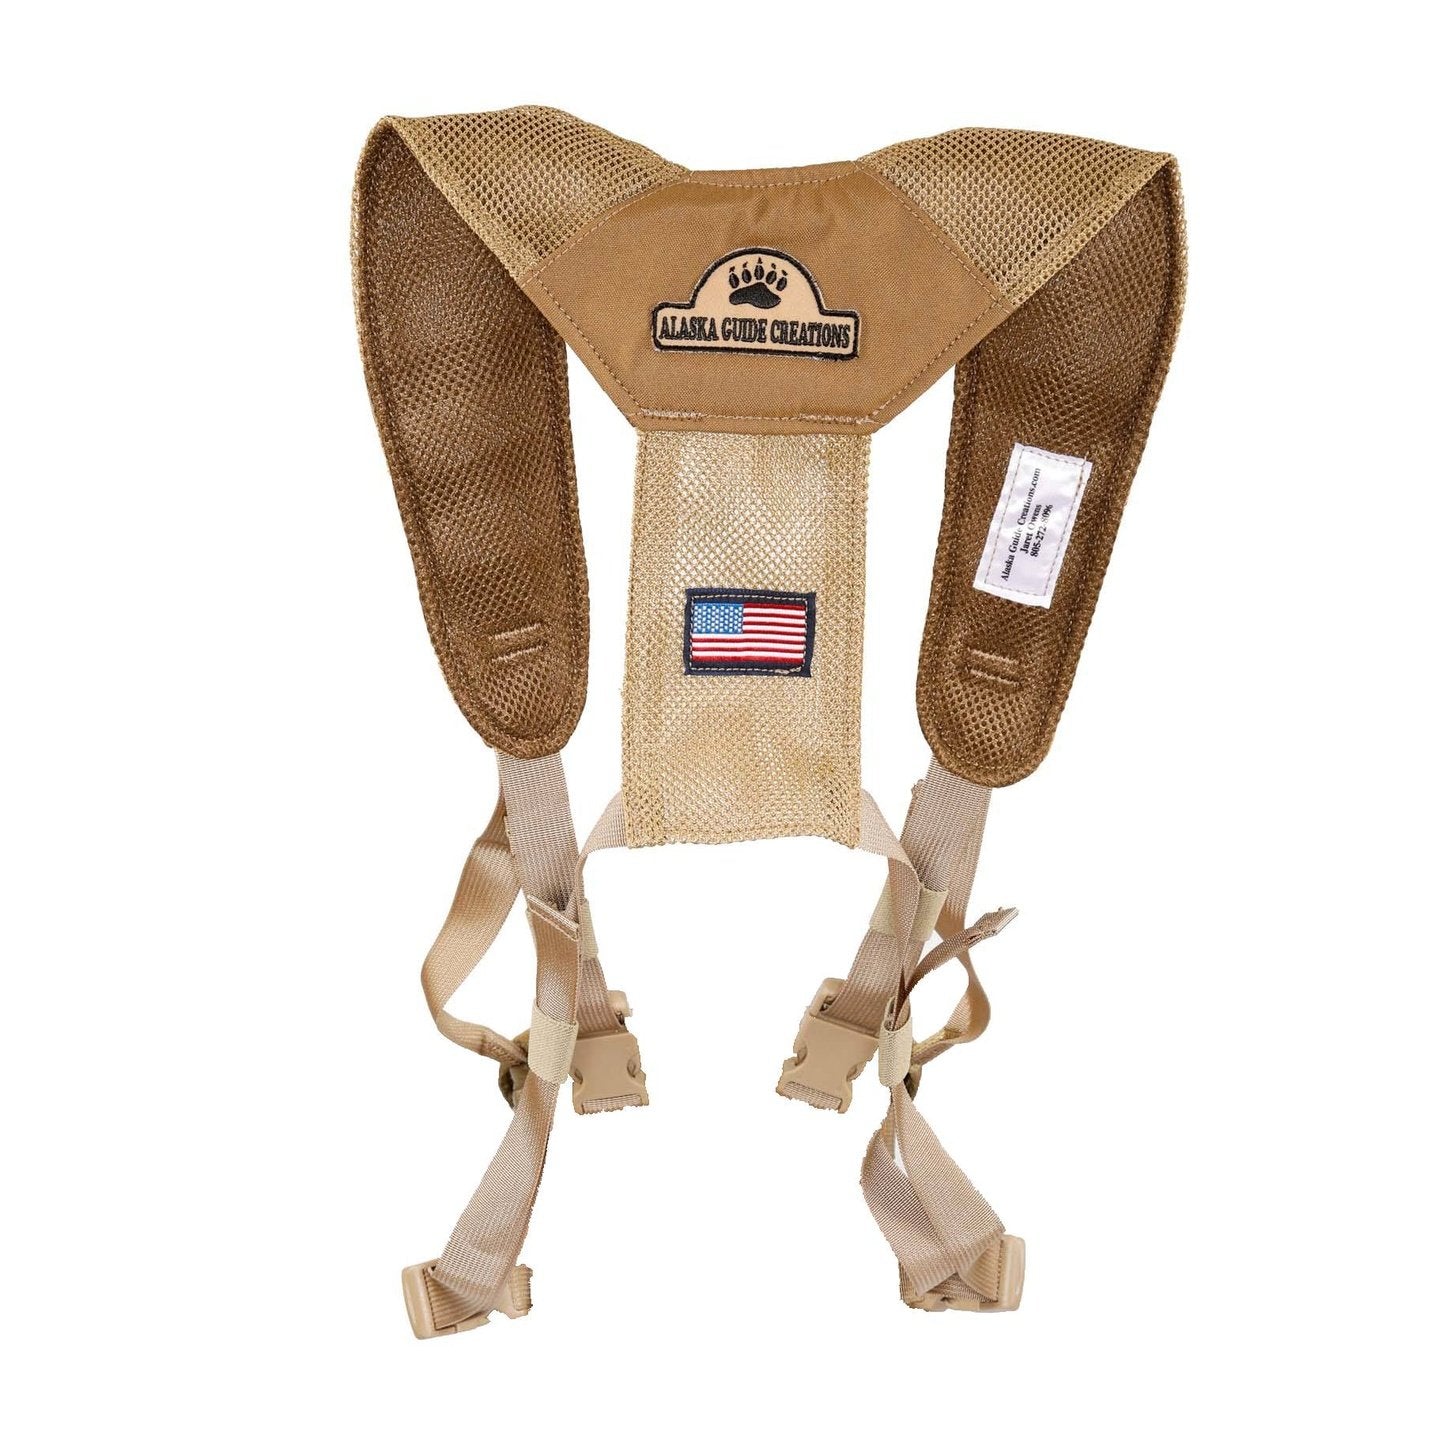 AGC Harness Alaska Guide Creations Coyote Brown 